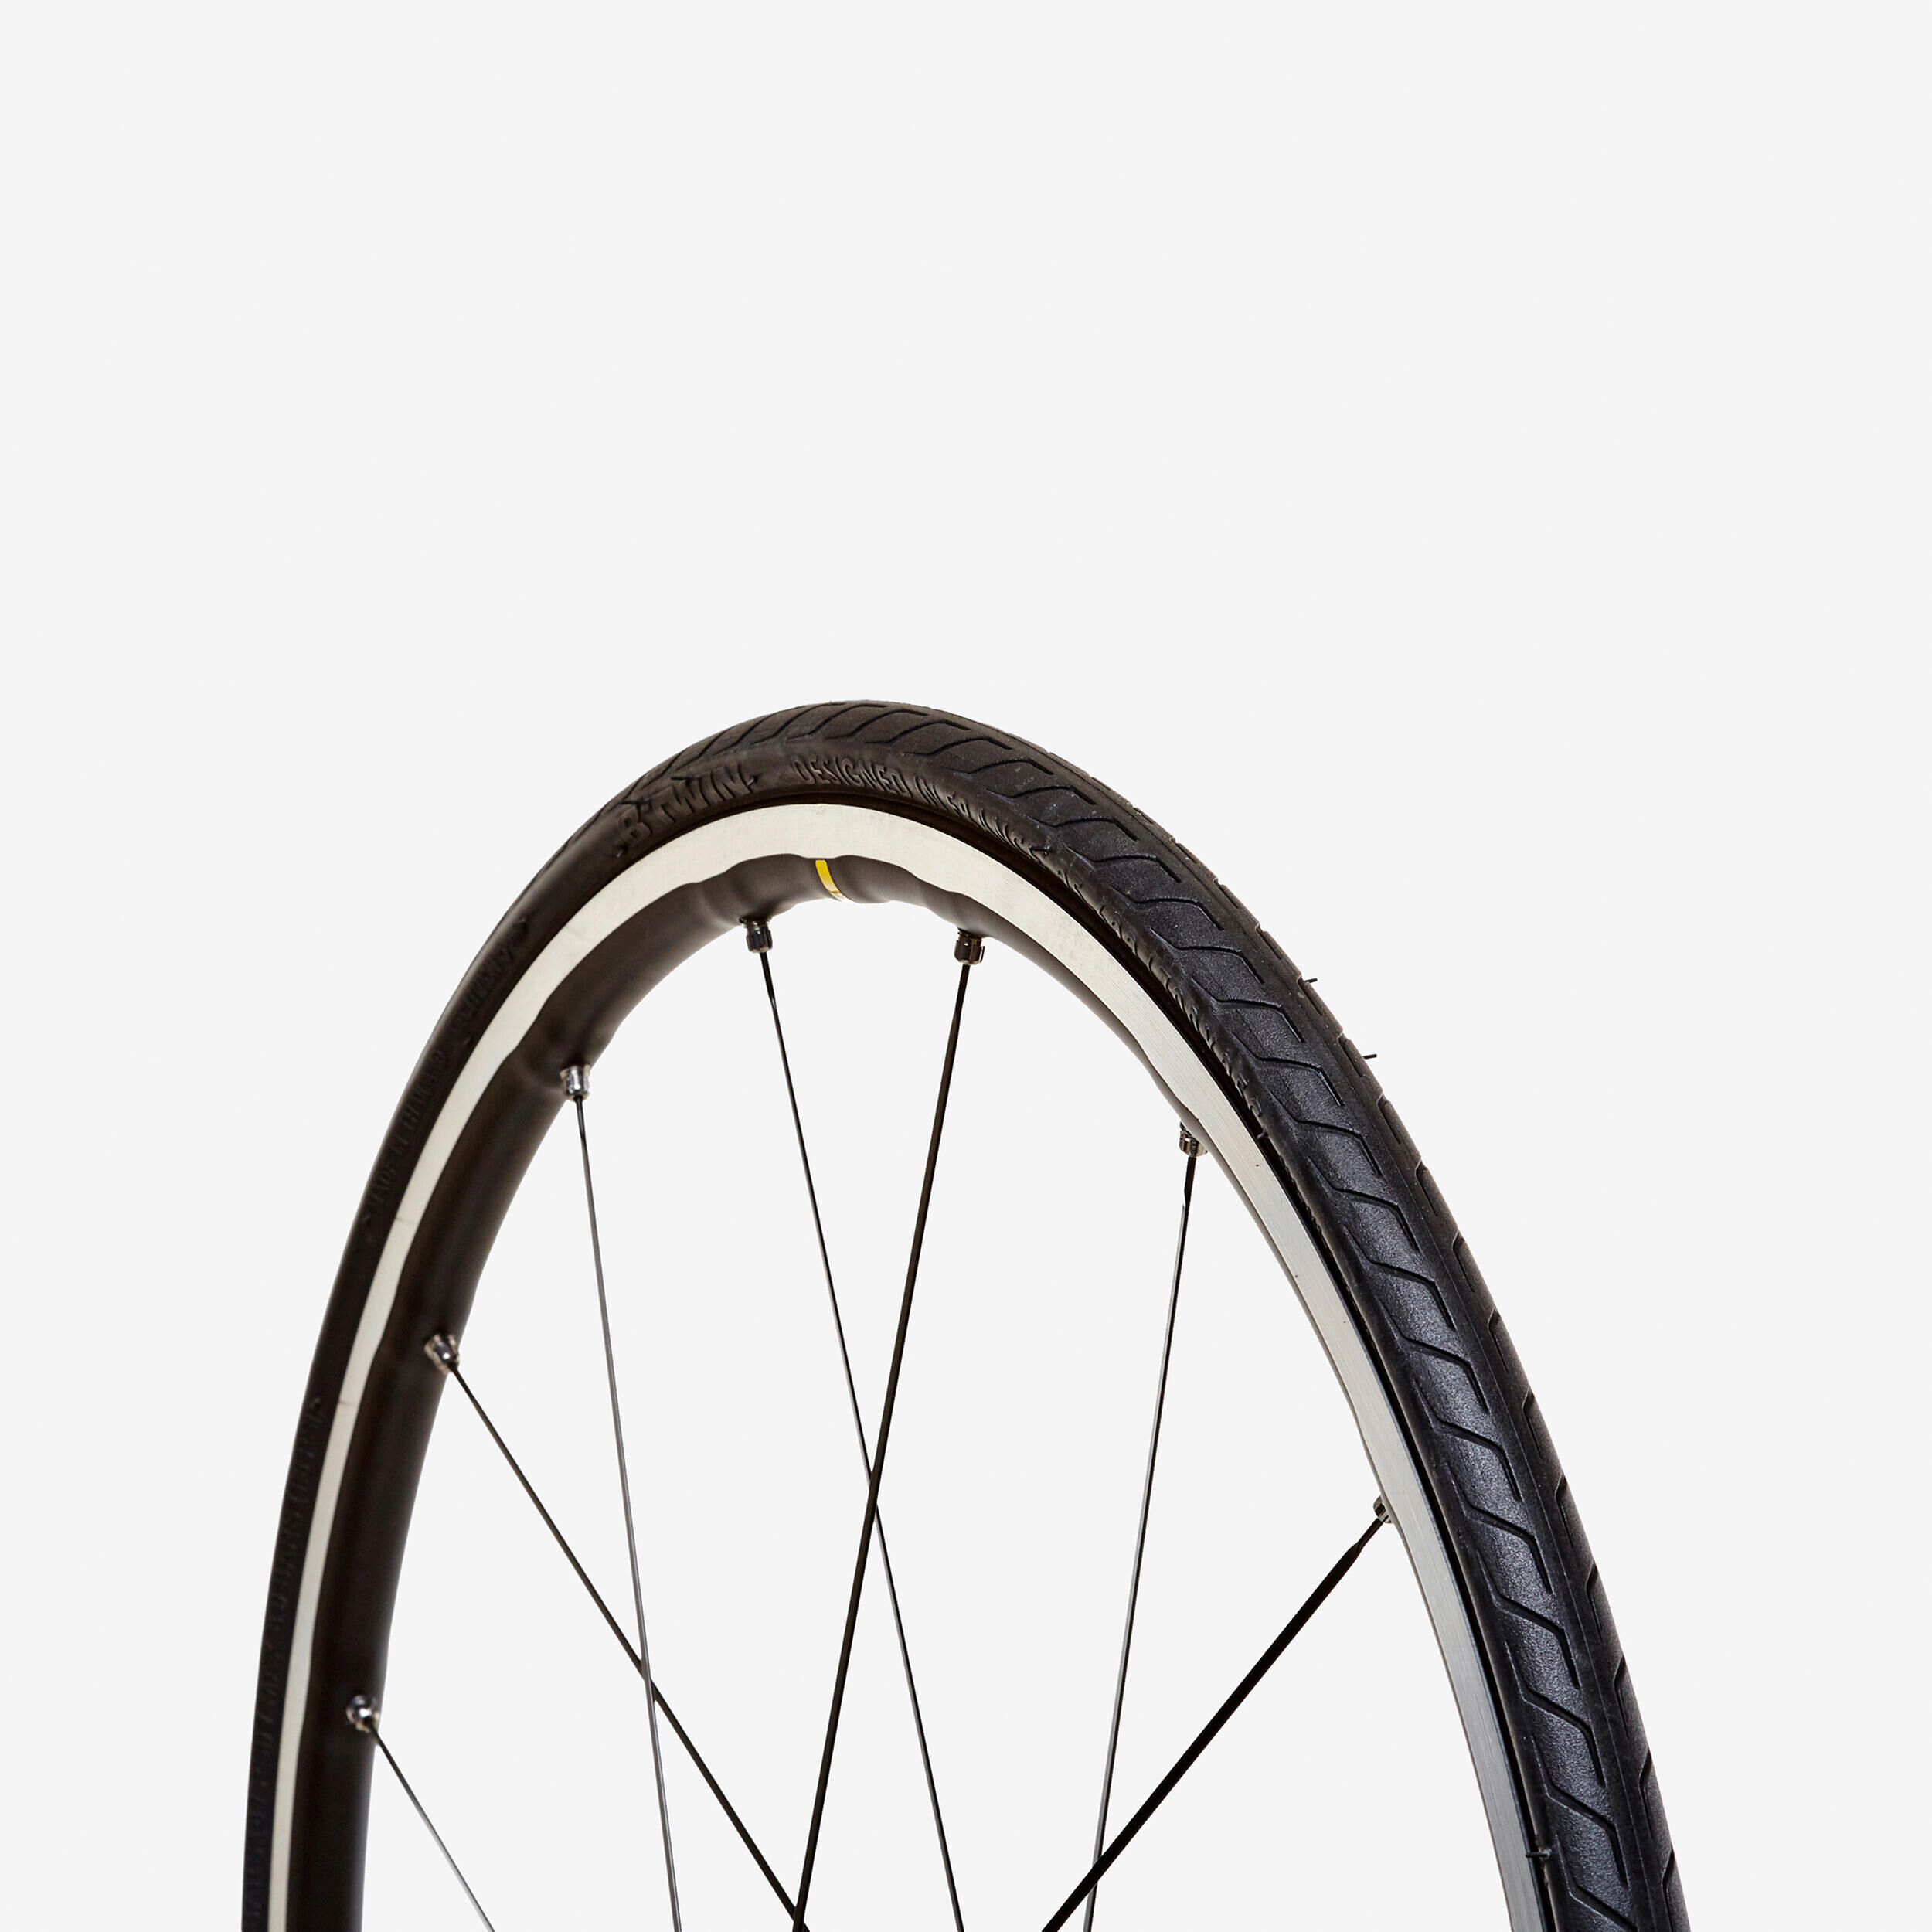 BTWIN Triban Protect Road Bike Tyre 700x32